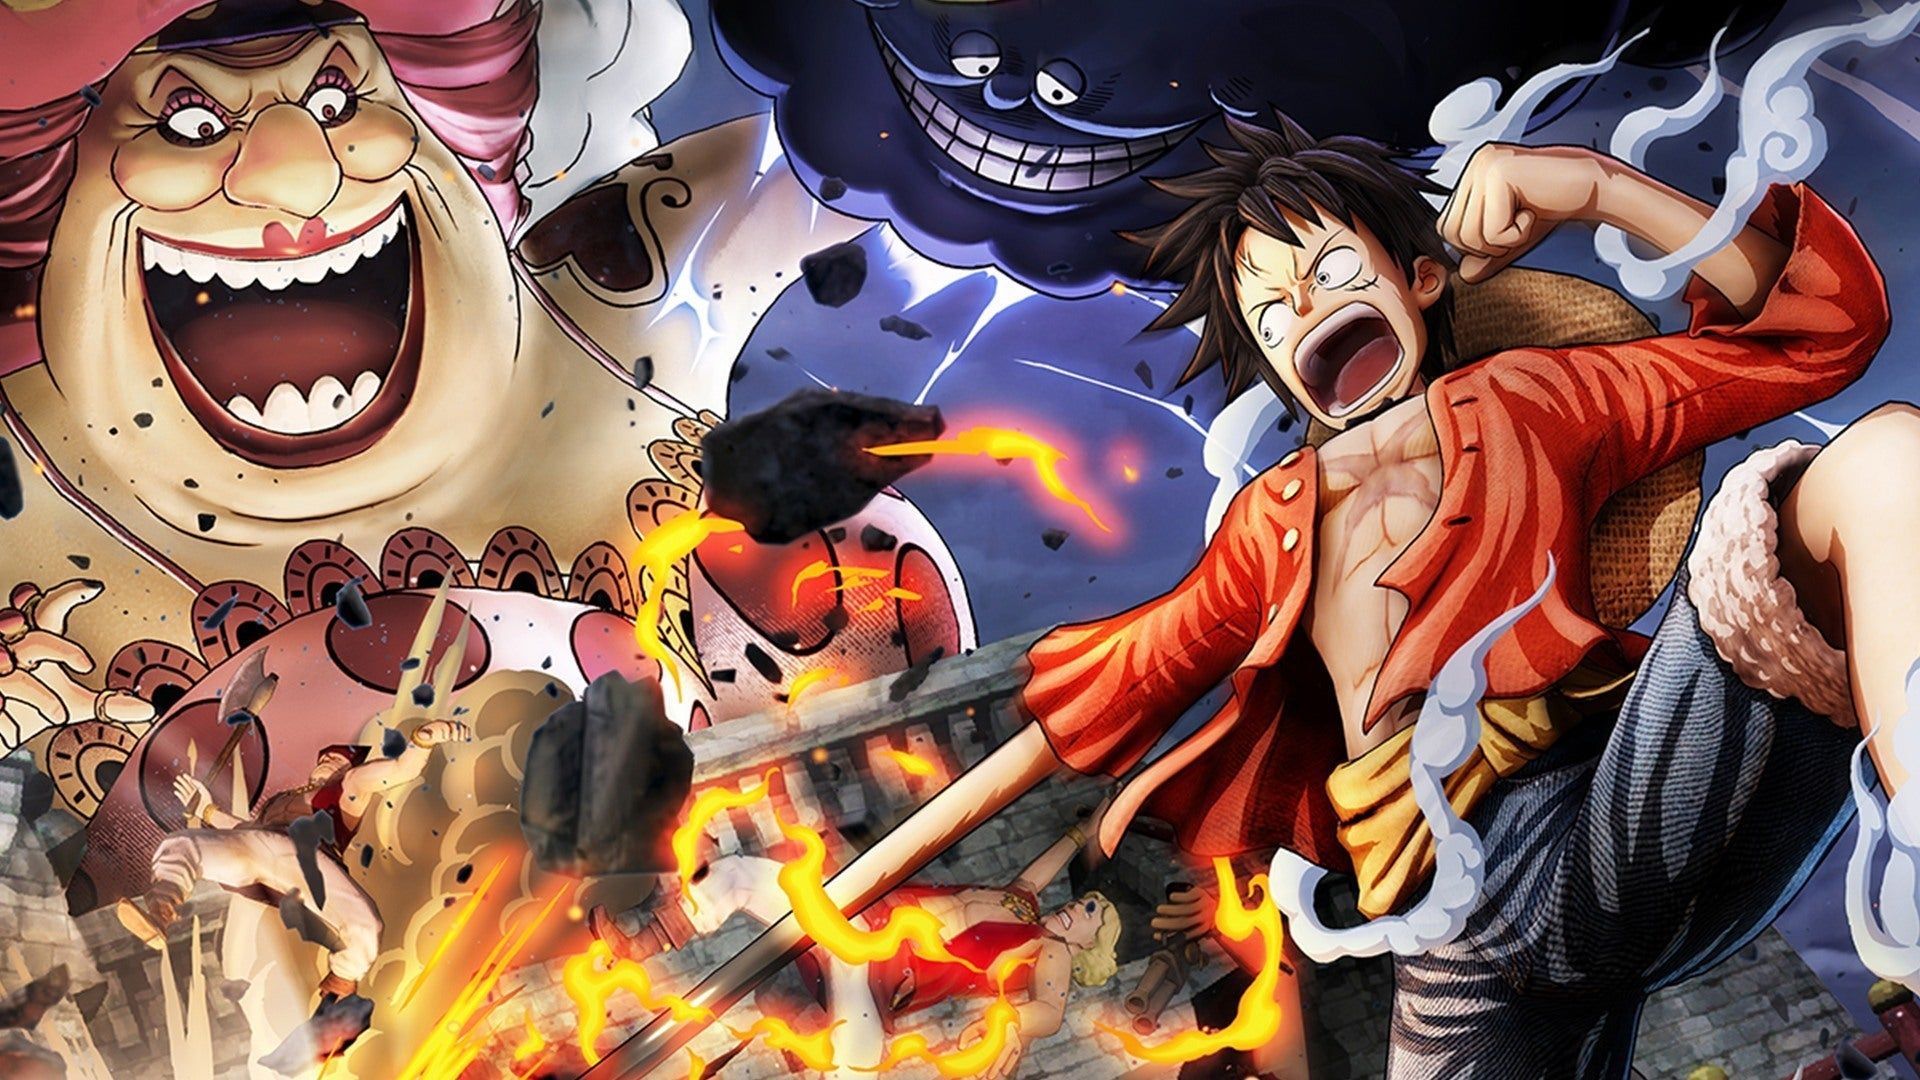 Aesthetic One Piece Ps4 Wallpapers - Wallpaper Cave